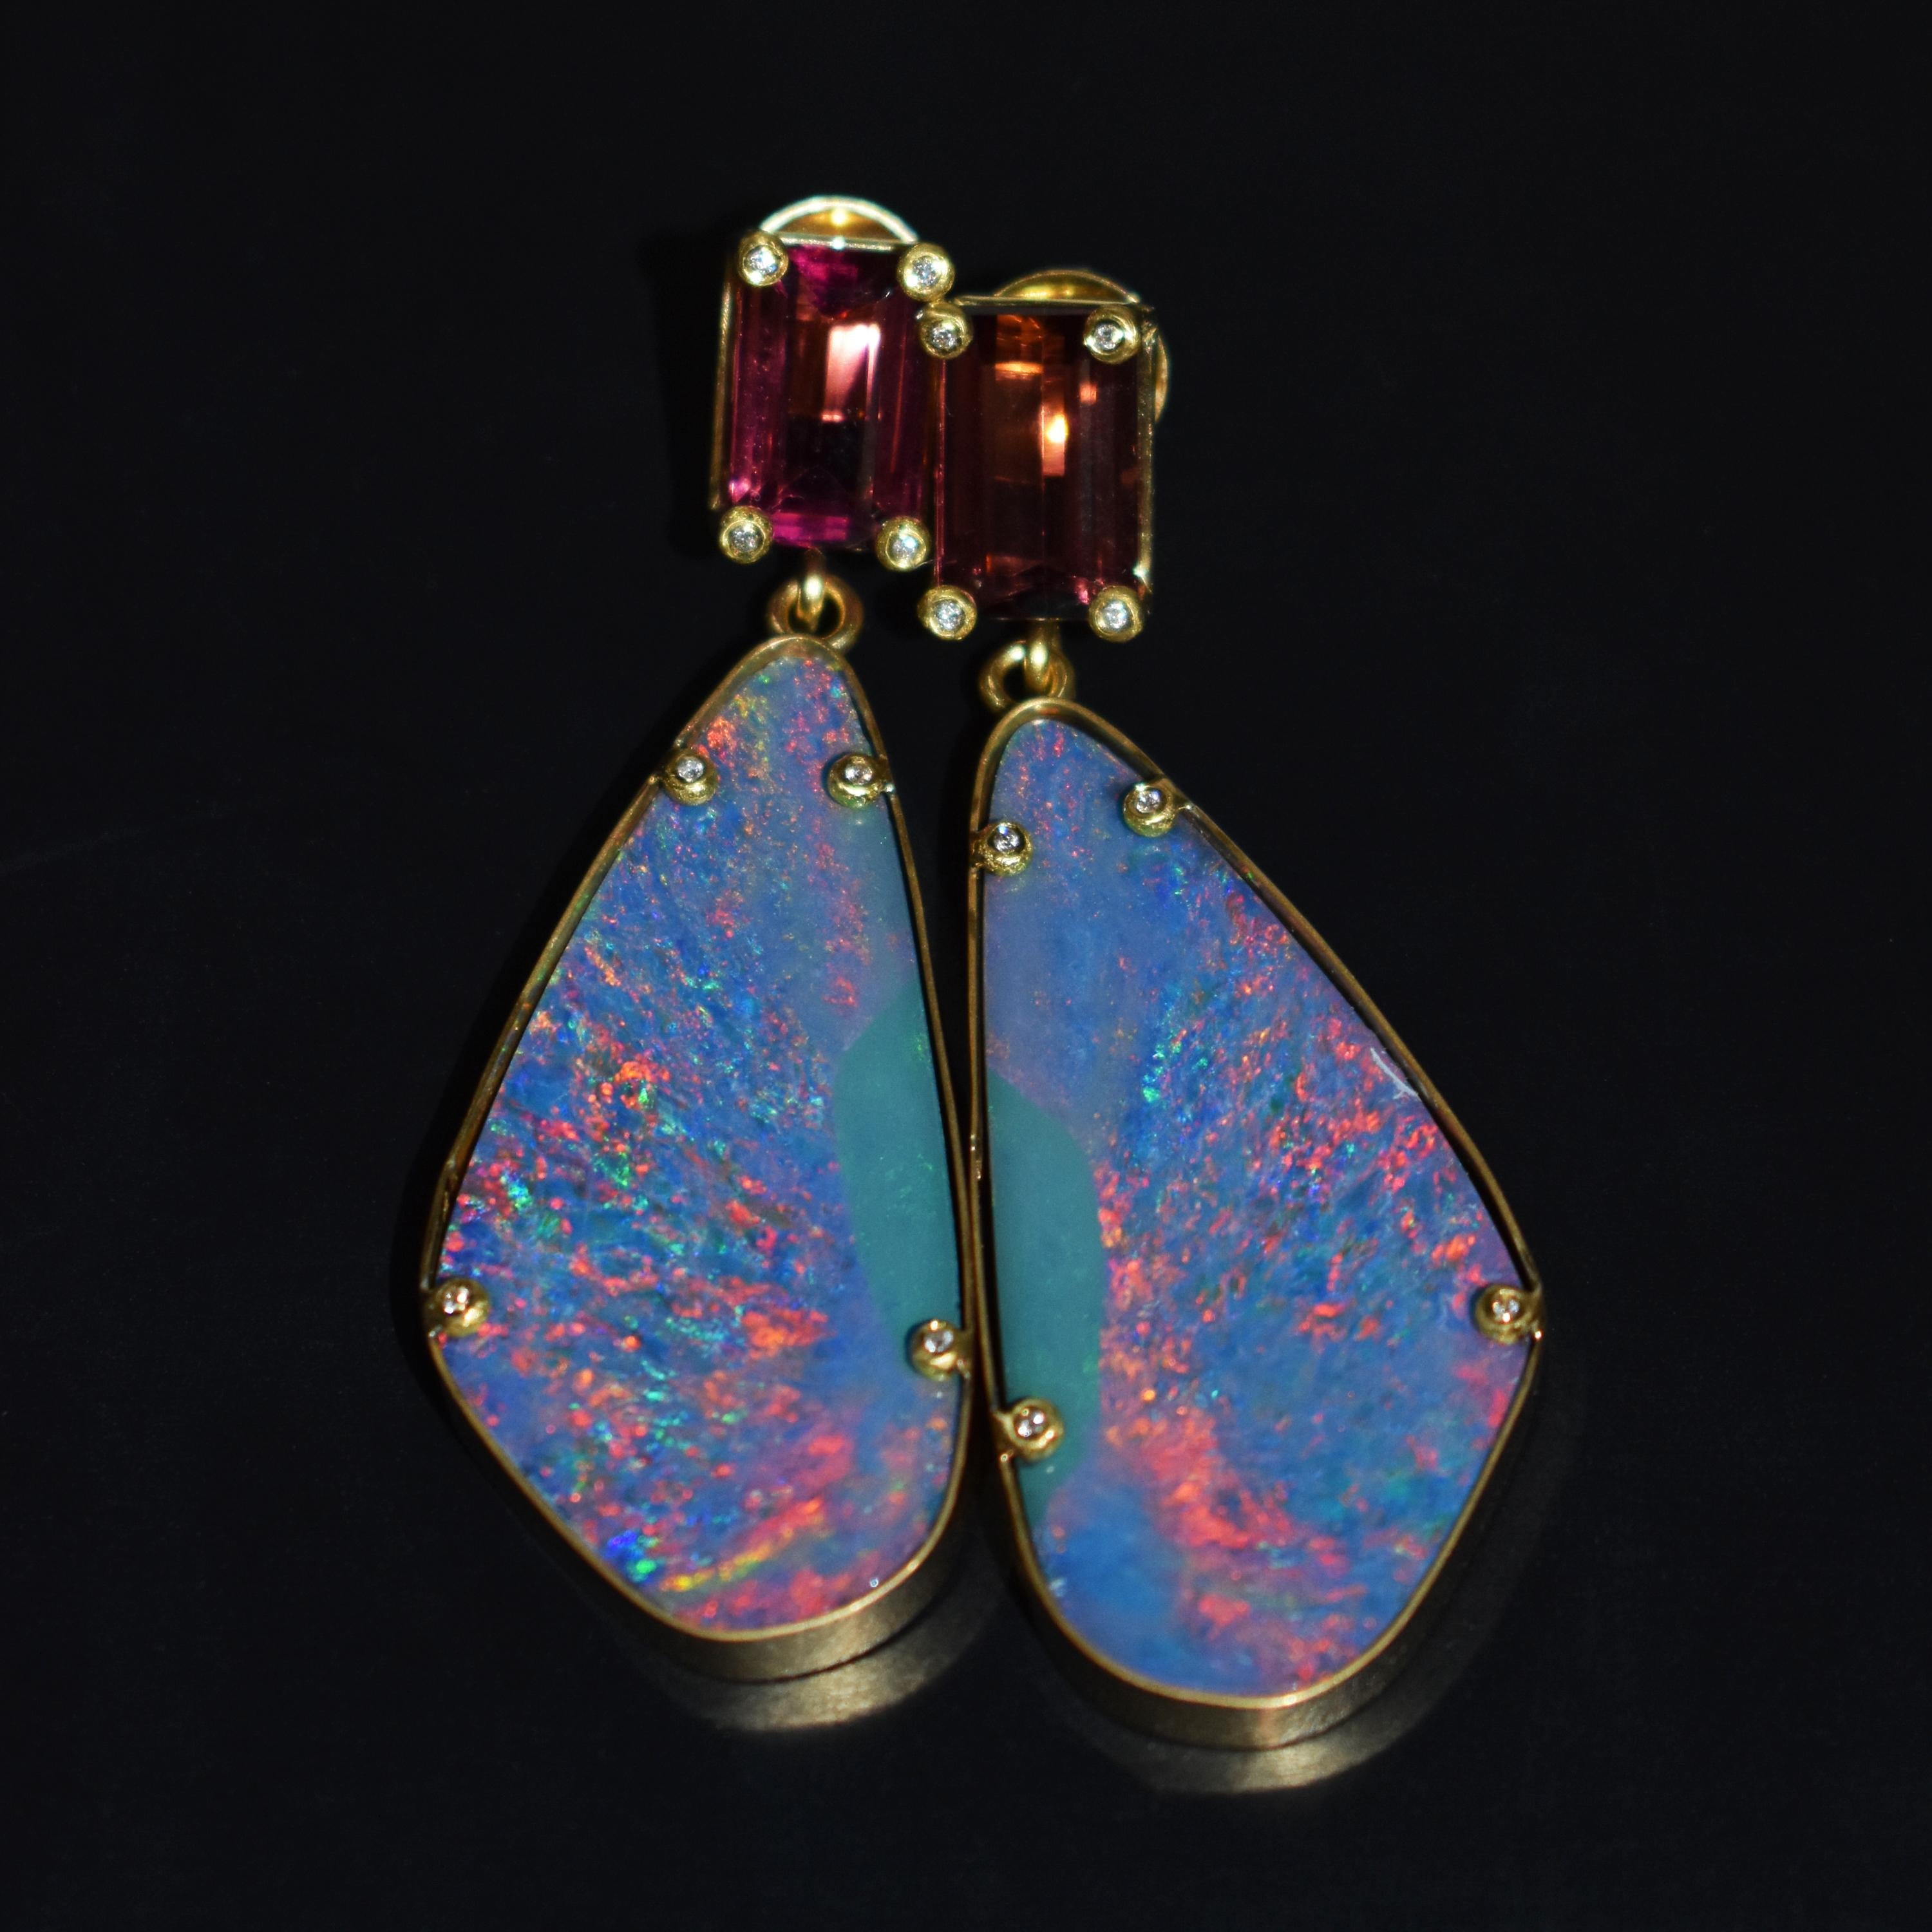 9.02 carat Pink Tourmaline and 37.6 carat Australian Boulder Opals set in hand-forged 22k yellow gold stud dangle earrings with accent white diamonds (0.08 cttw, G-H, SI1). Dangle earrings are 2.25 inches or 57mm in length. Amazing play-of-color and